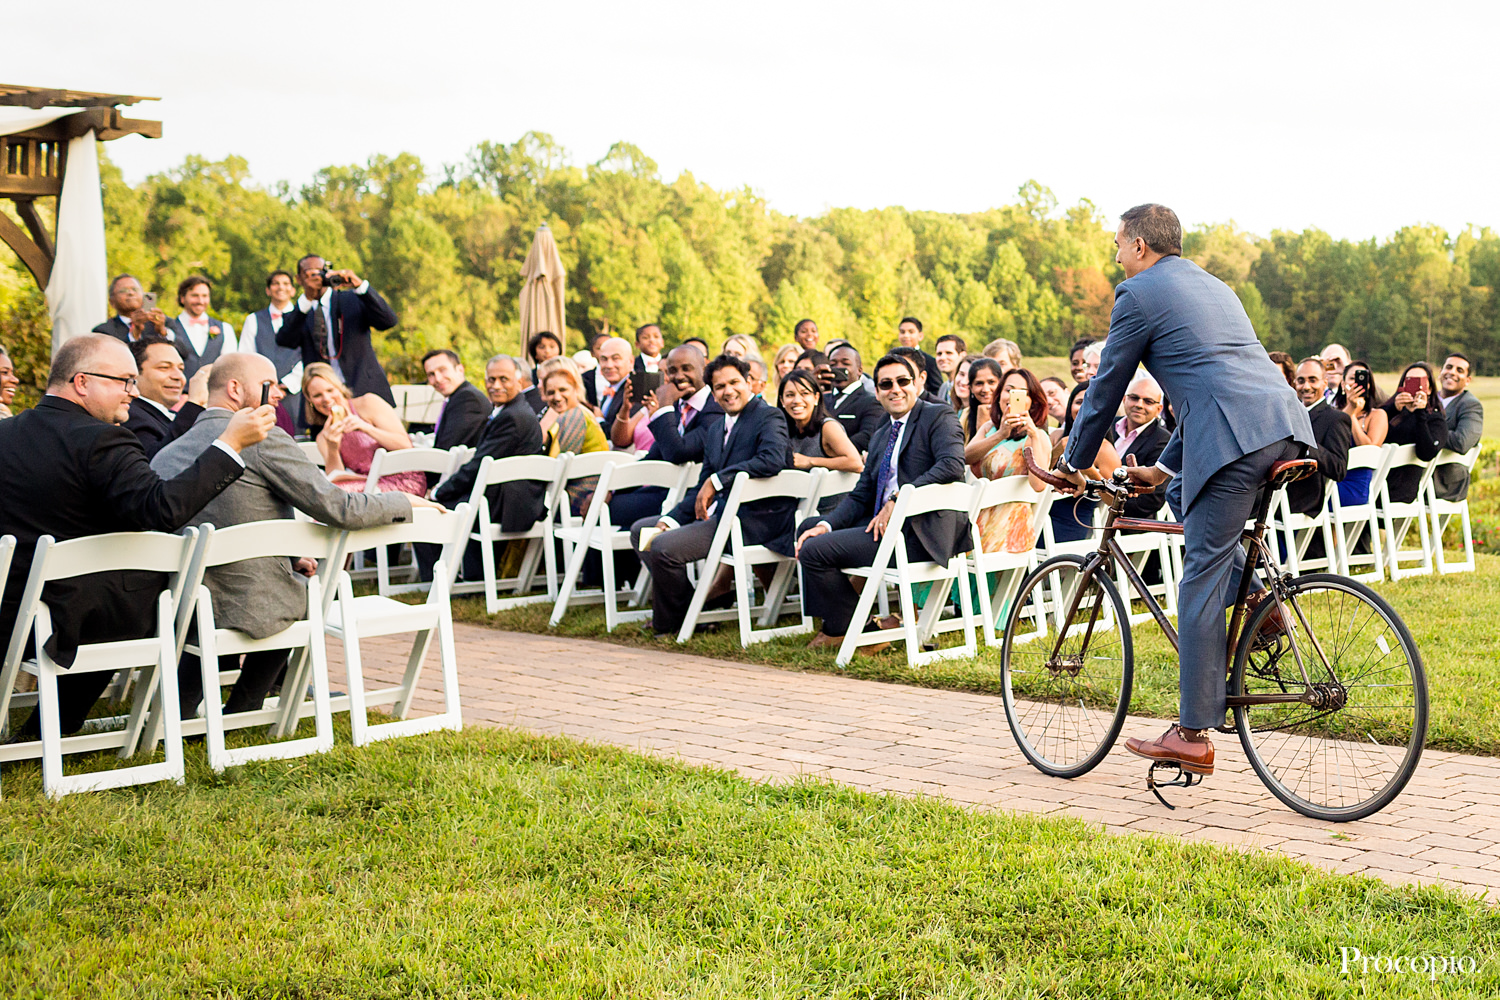 Running Hare Vineyard, Leesburg, Virginia, Indian couple, Indian bride and groom, bicycle wedding theme, cyclists, outdoorsy, wedding colors are pink, orange, peach, tan, outdoor ceremony, indoor reception, cream and gold Indian Wedding gown, fall wedding, Procopio Photography, best top Washington DC photographer, best top Maryland photographer, best top Virginia photographer, best top DMV photographer, best top wedding photographer, best top commercial photographer, best top portrait photographer, best top boudoir photographer, modern fine art portraits, dramatic, unique, different, bold, editorial, photojournalism, award winning photographer, published photographer, memorable images, be different, stand out